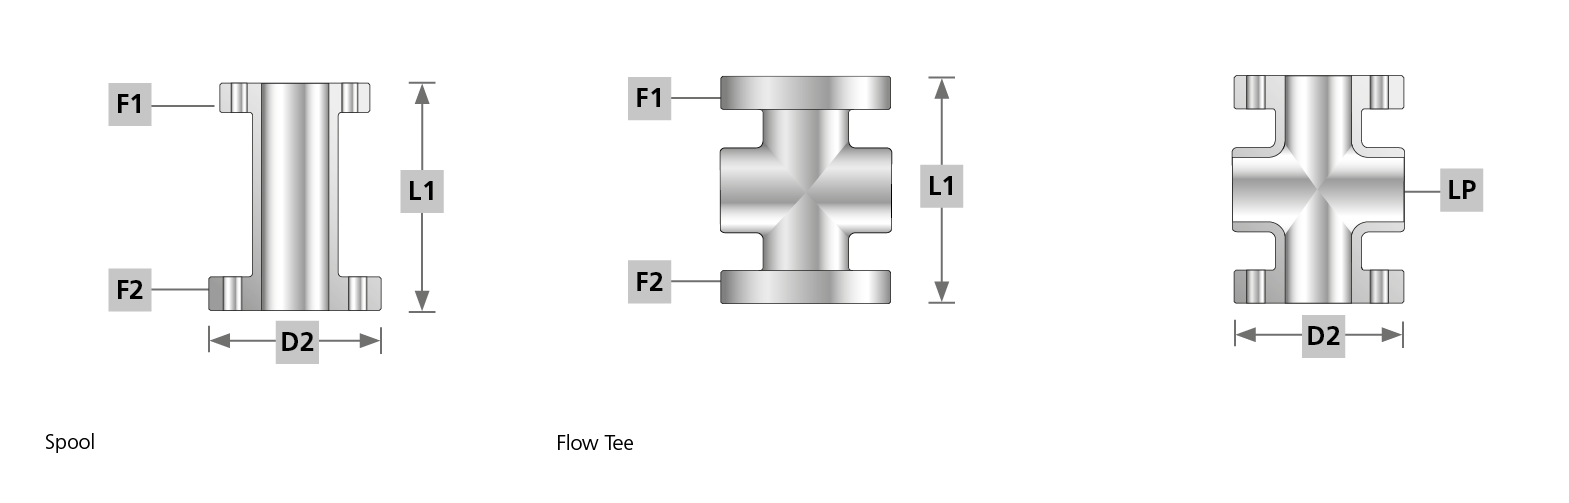 Flow Tee and Spool